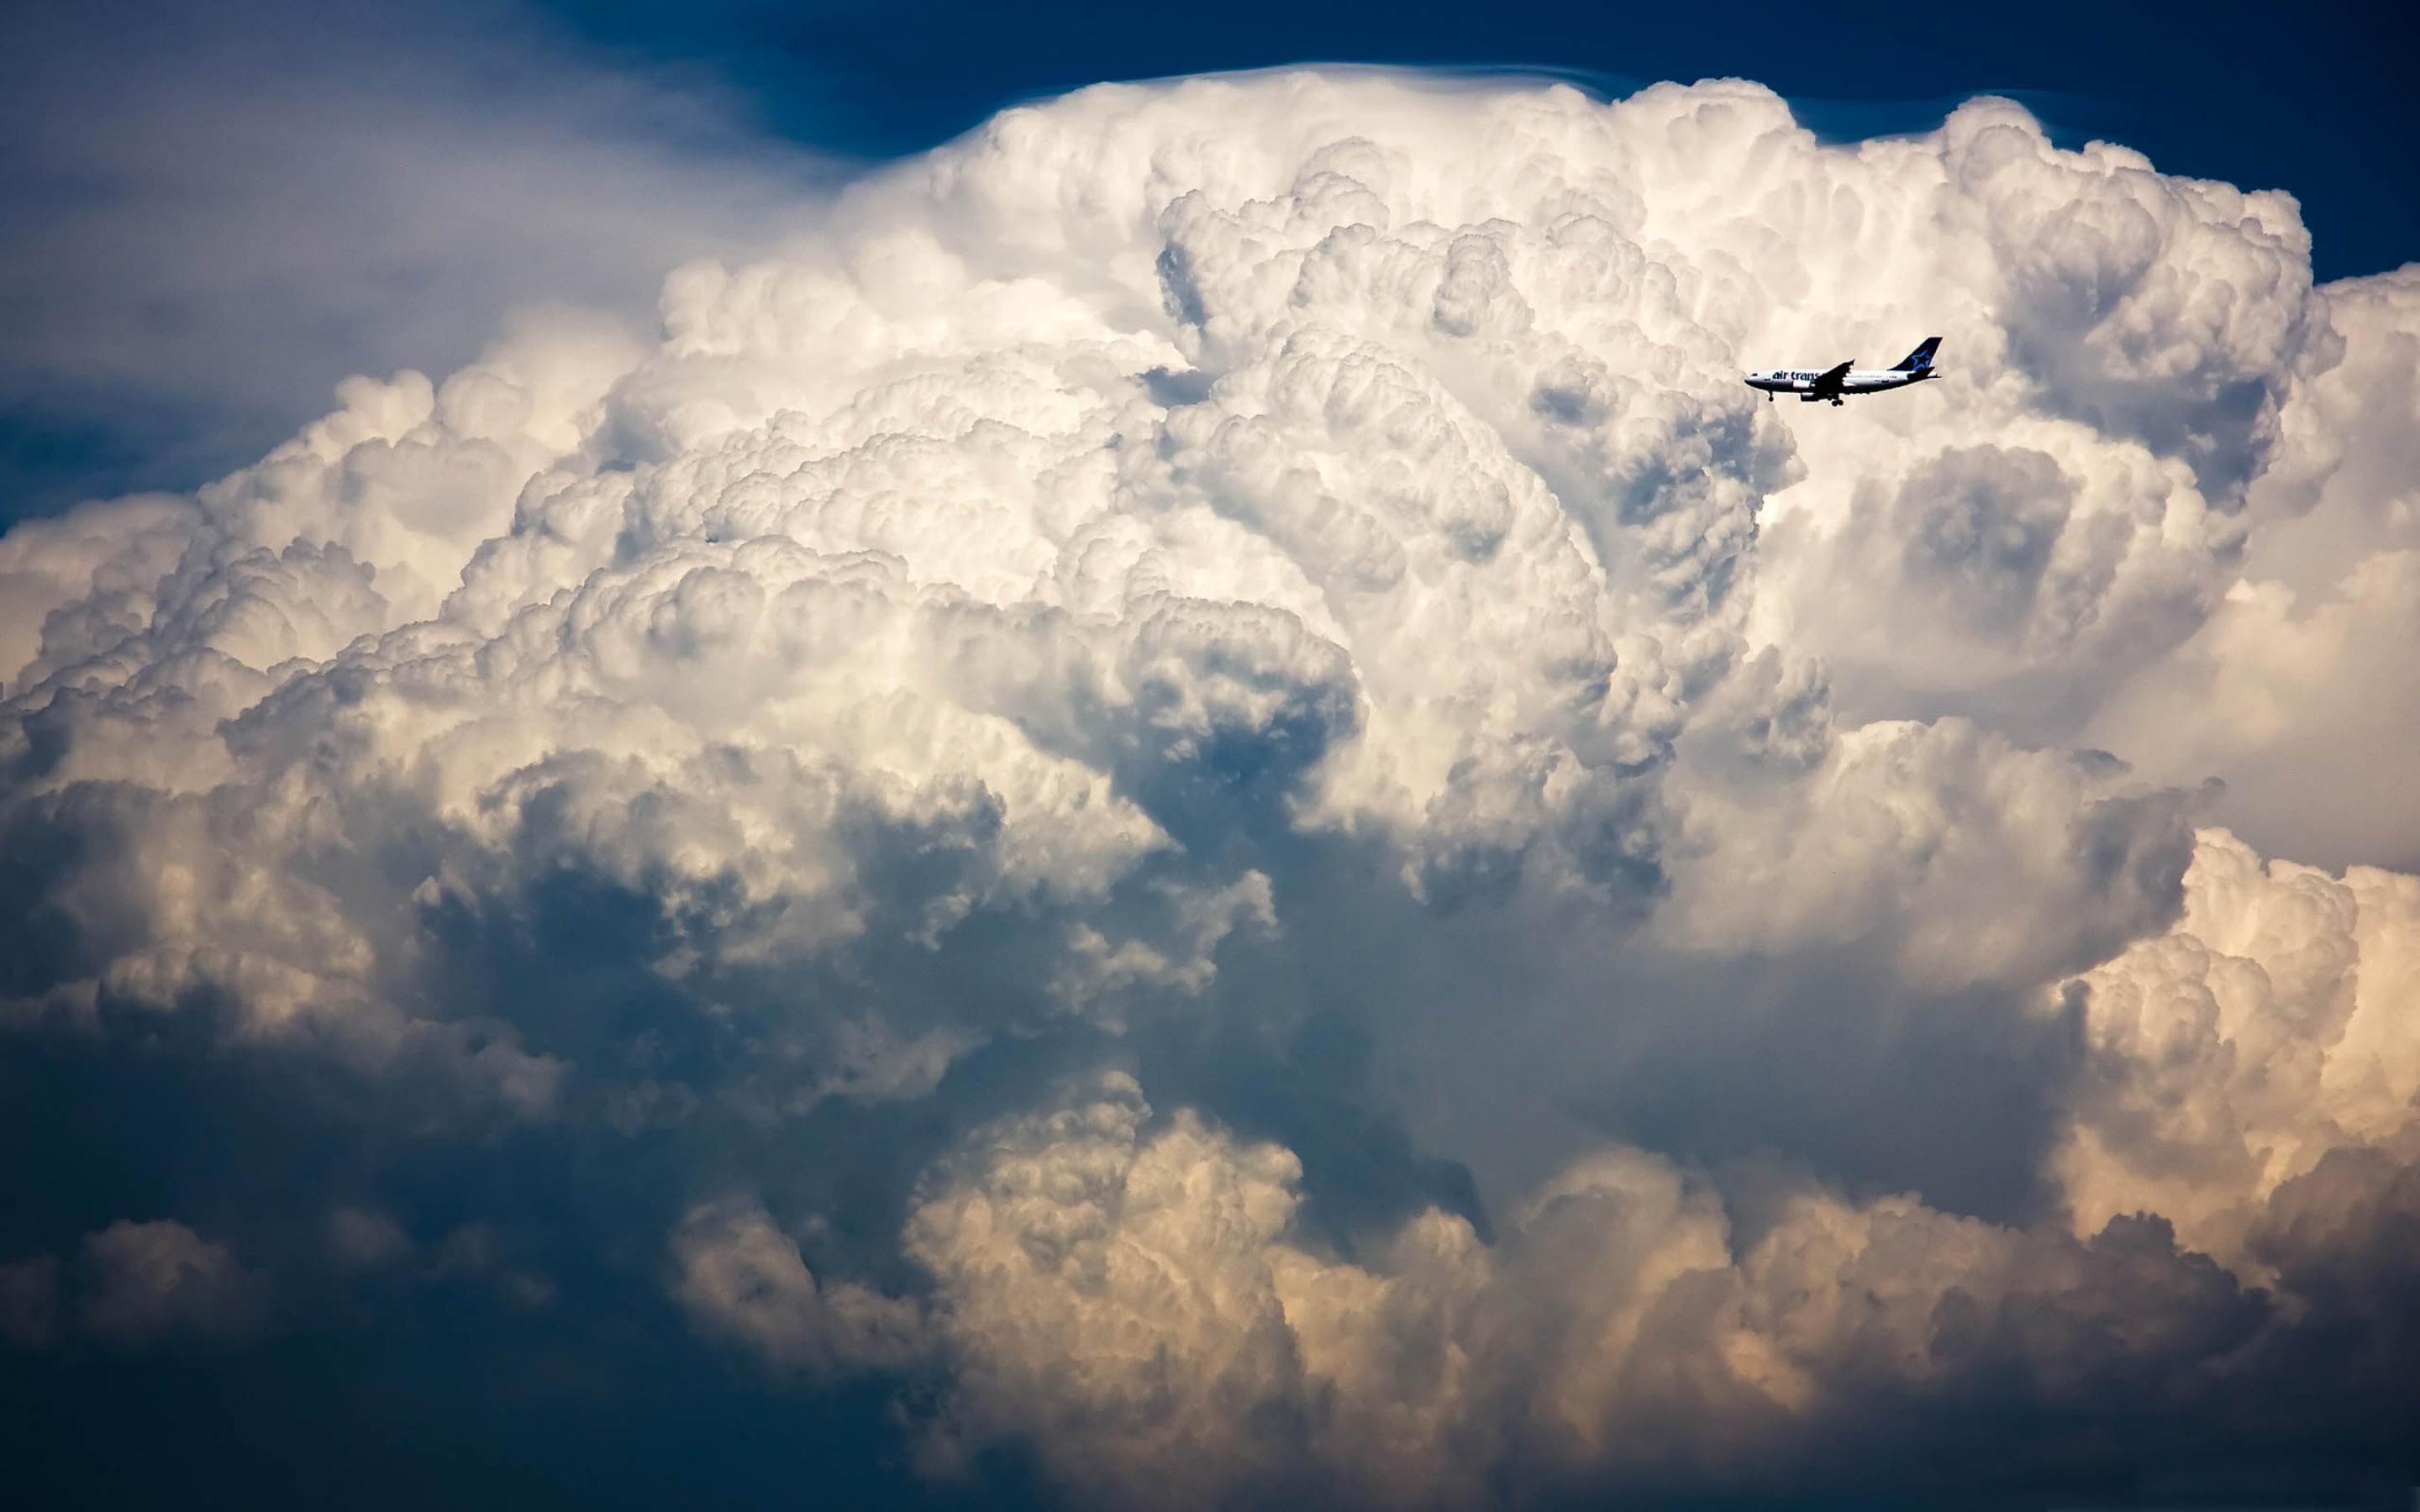 The plane in clouds wallpapers and images - wallpapers, pictures ...